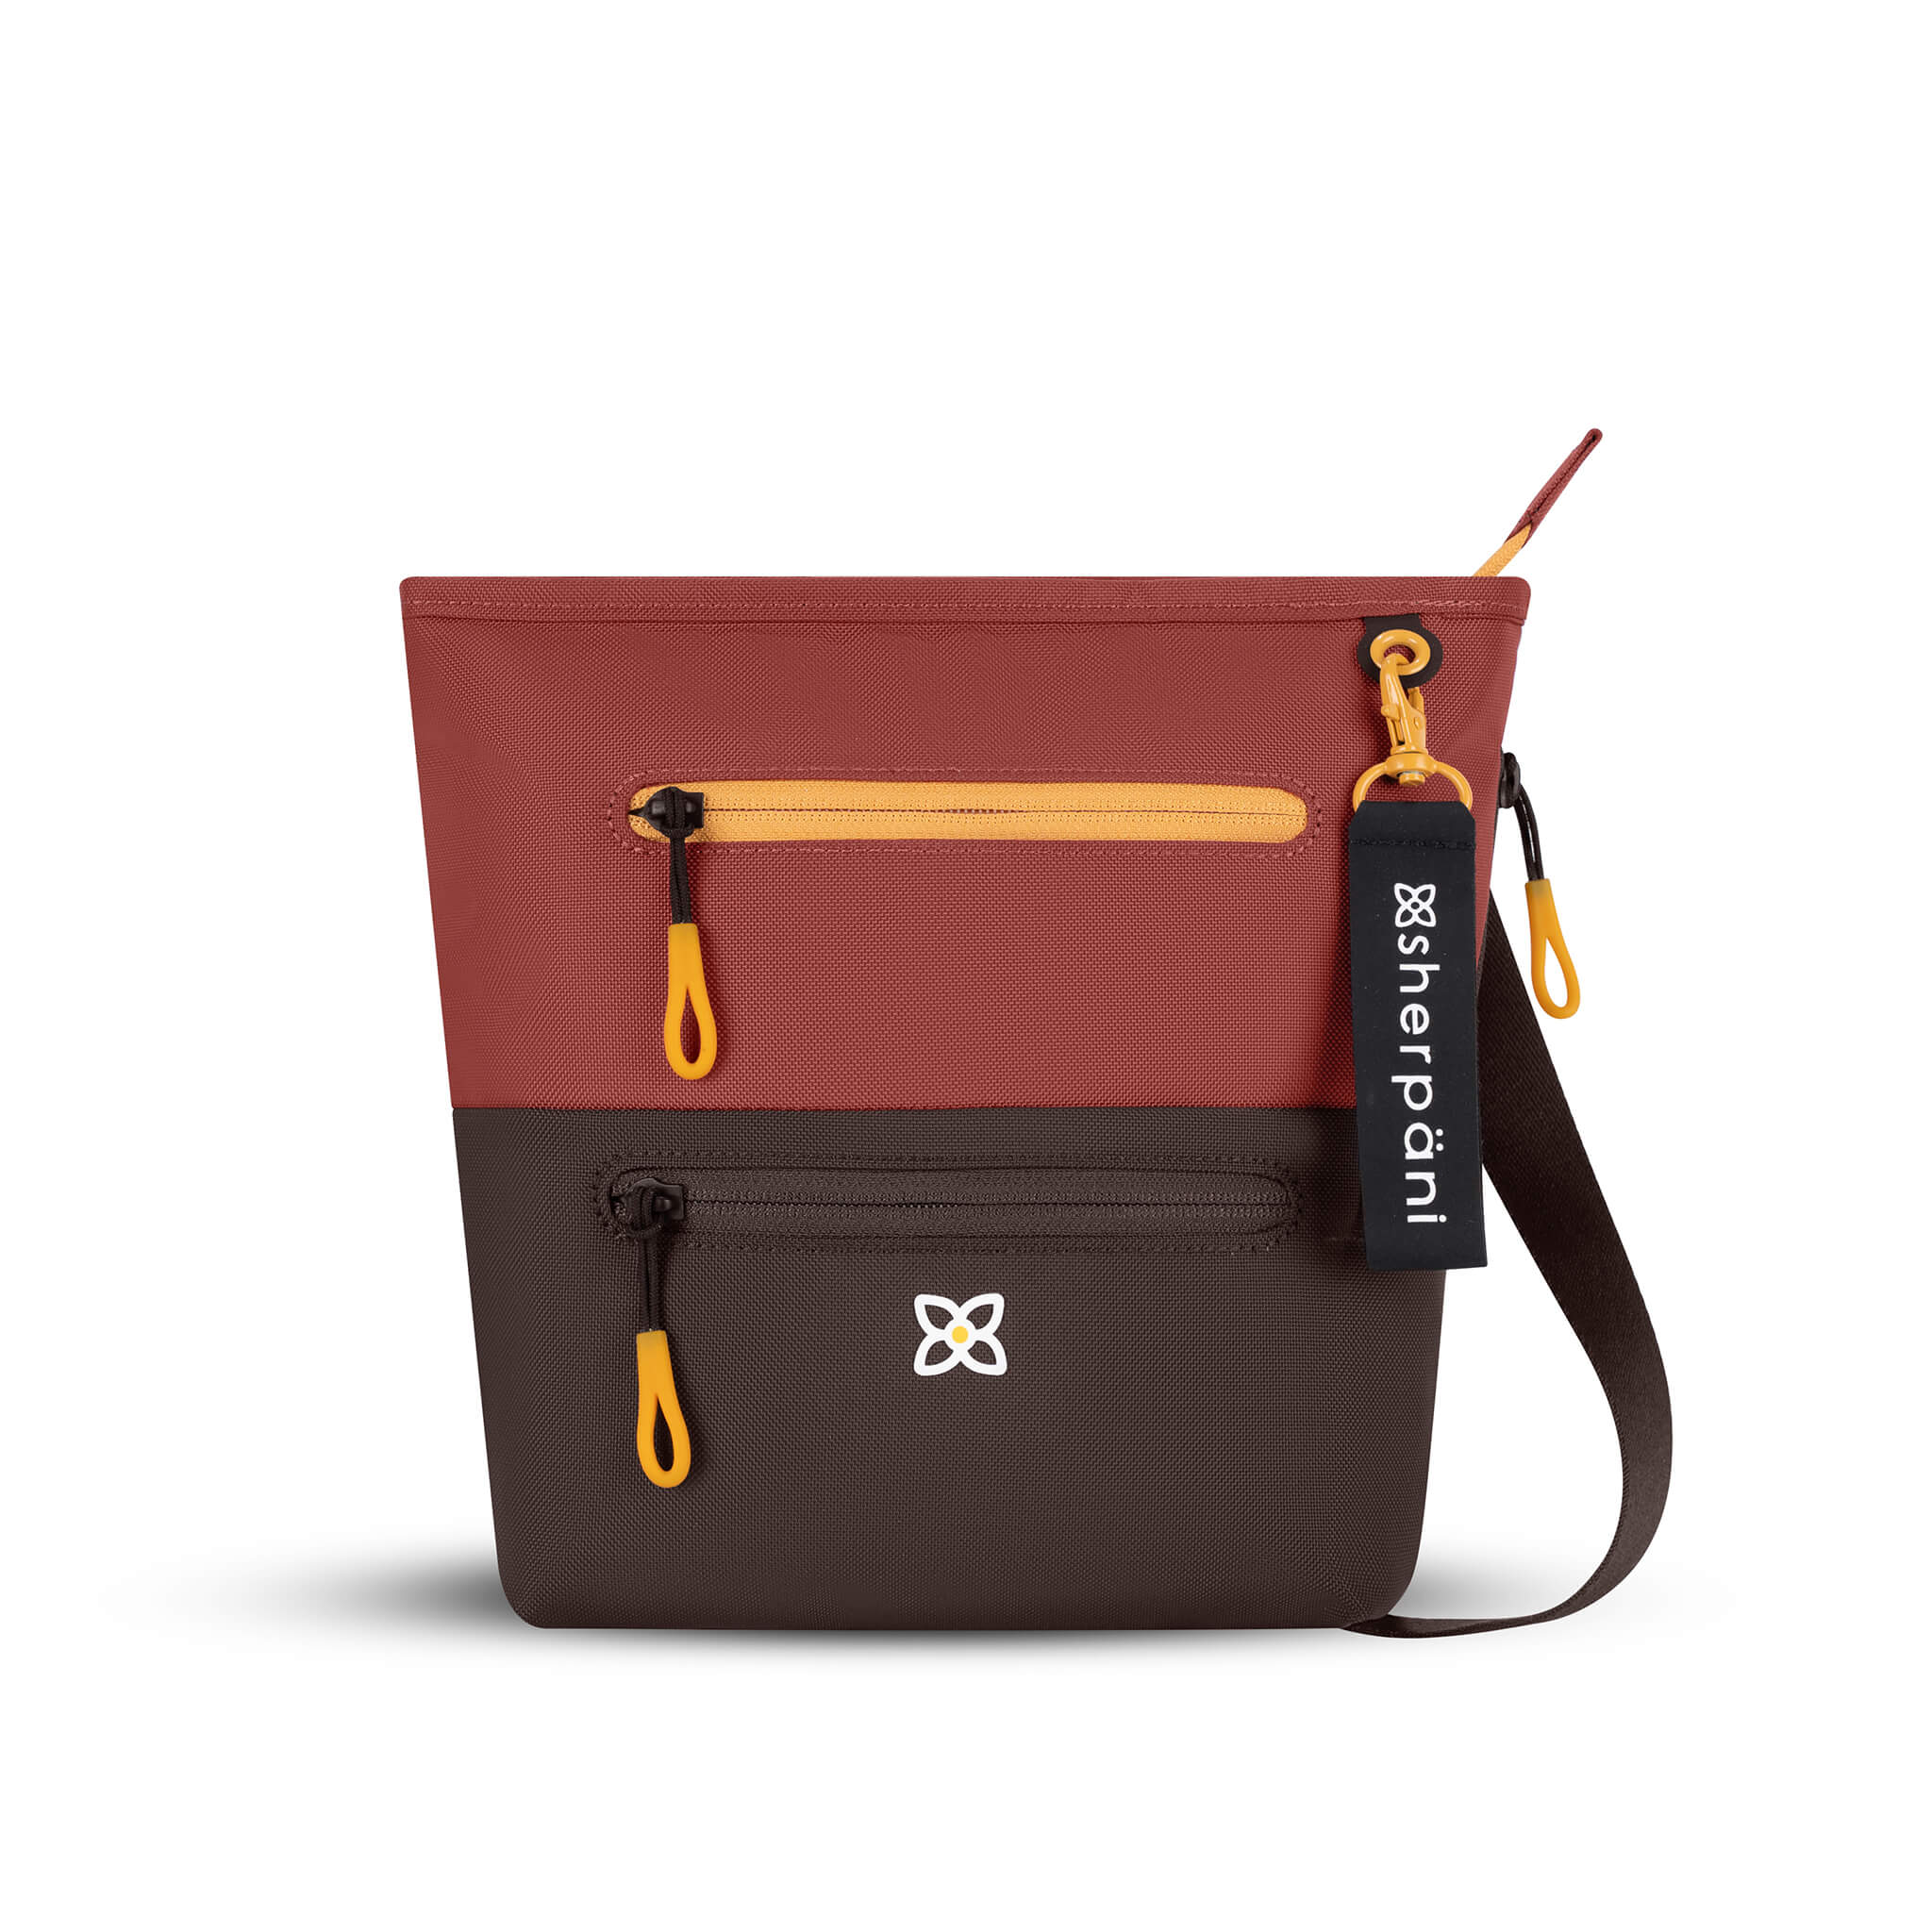 Flat front view of Sherpani crossbody travel bag, the Sadie in Cider. Sadie features include two front zipper pockets, a discrete side pocket, detachable keychain, adjustable crossbody strap, back slip pocket and RFID blocking technology. The Cider color is two-toned in burgundy and dark brown with yellow accents. 